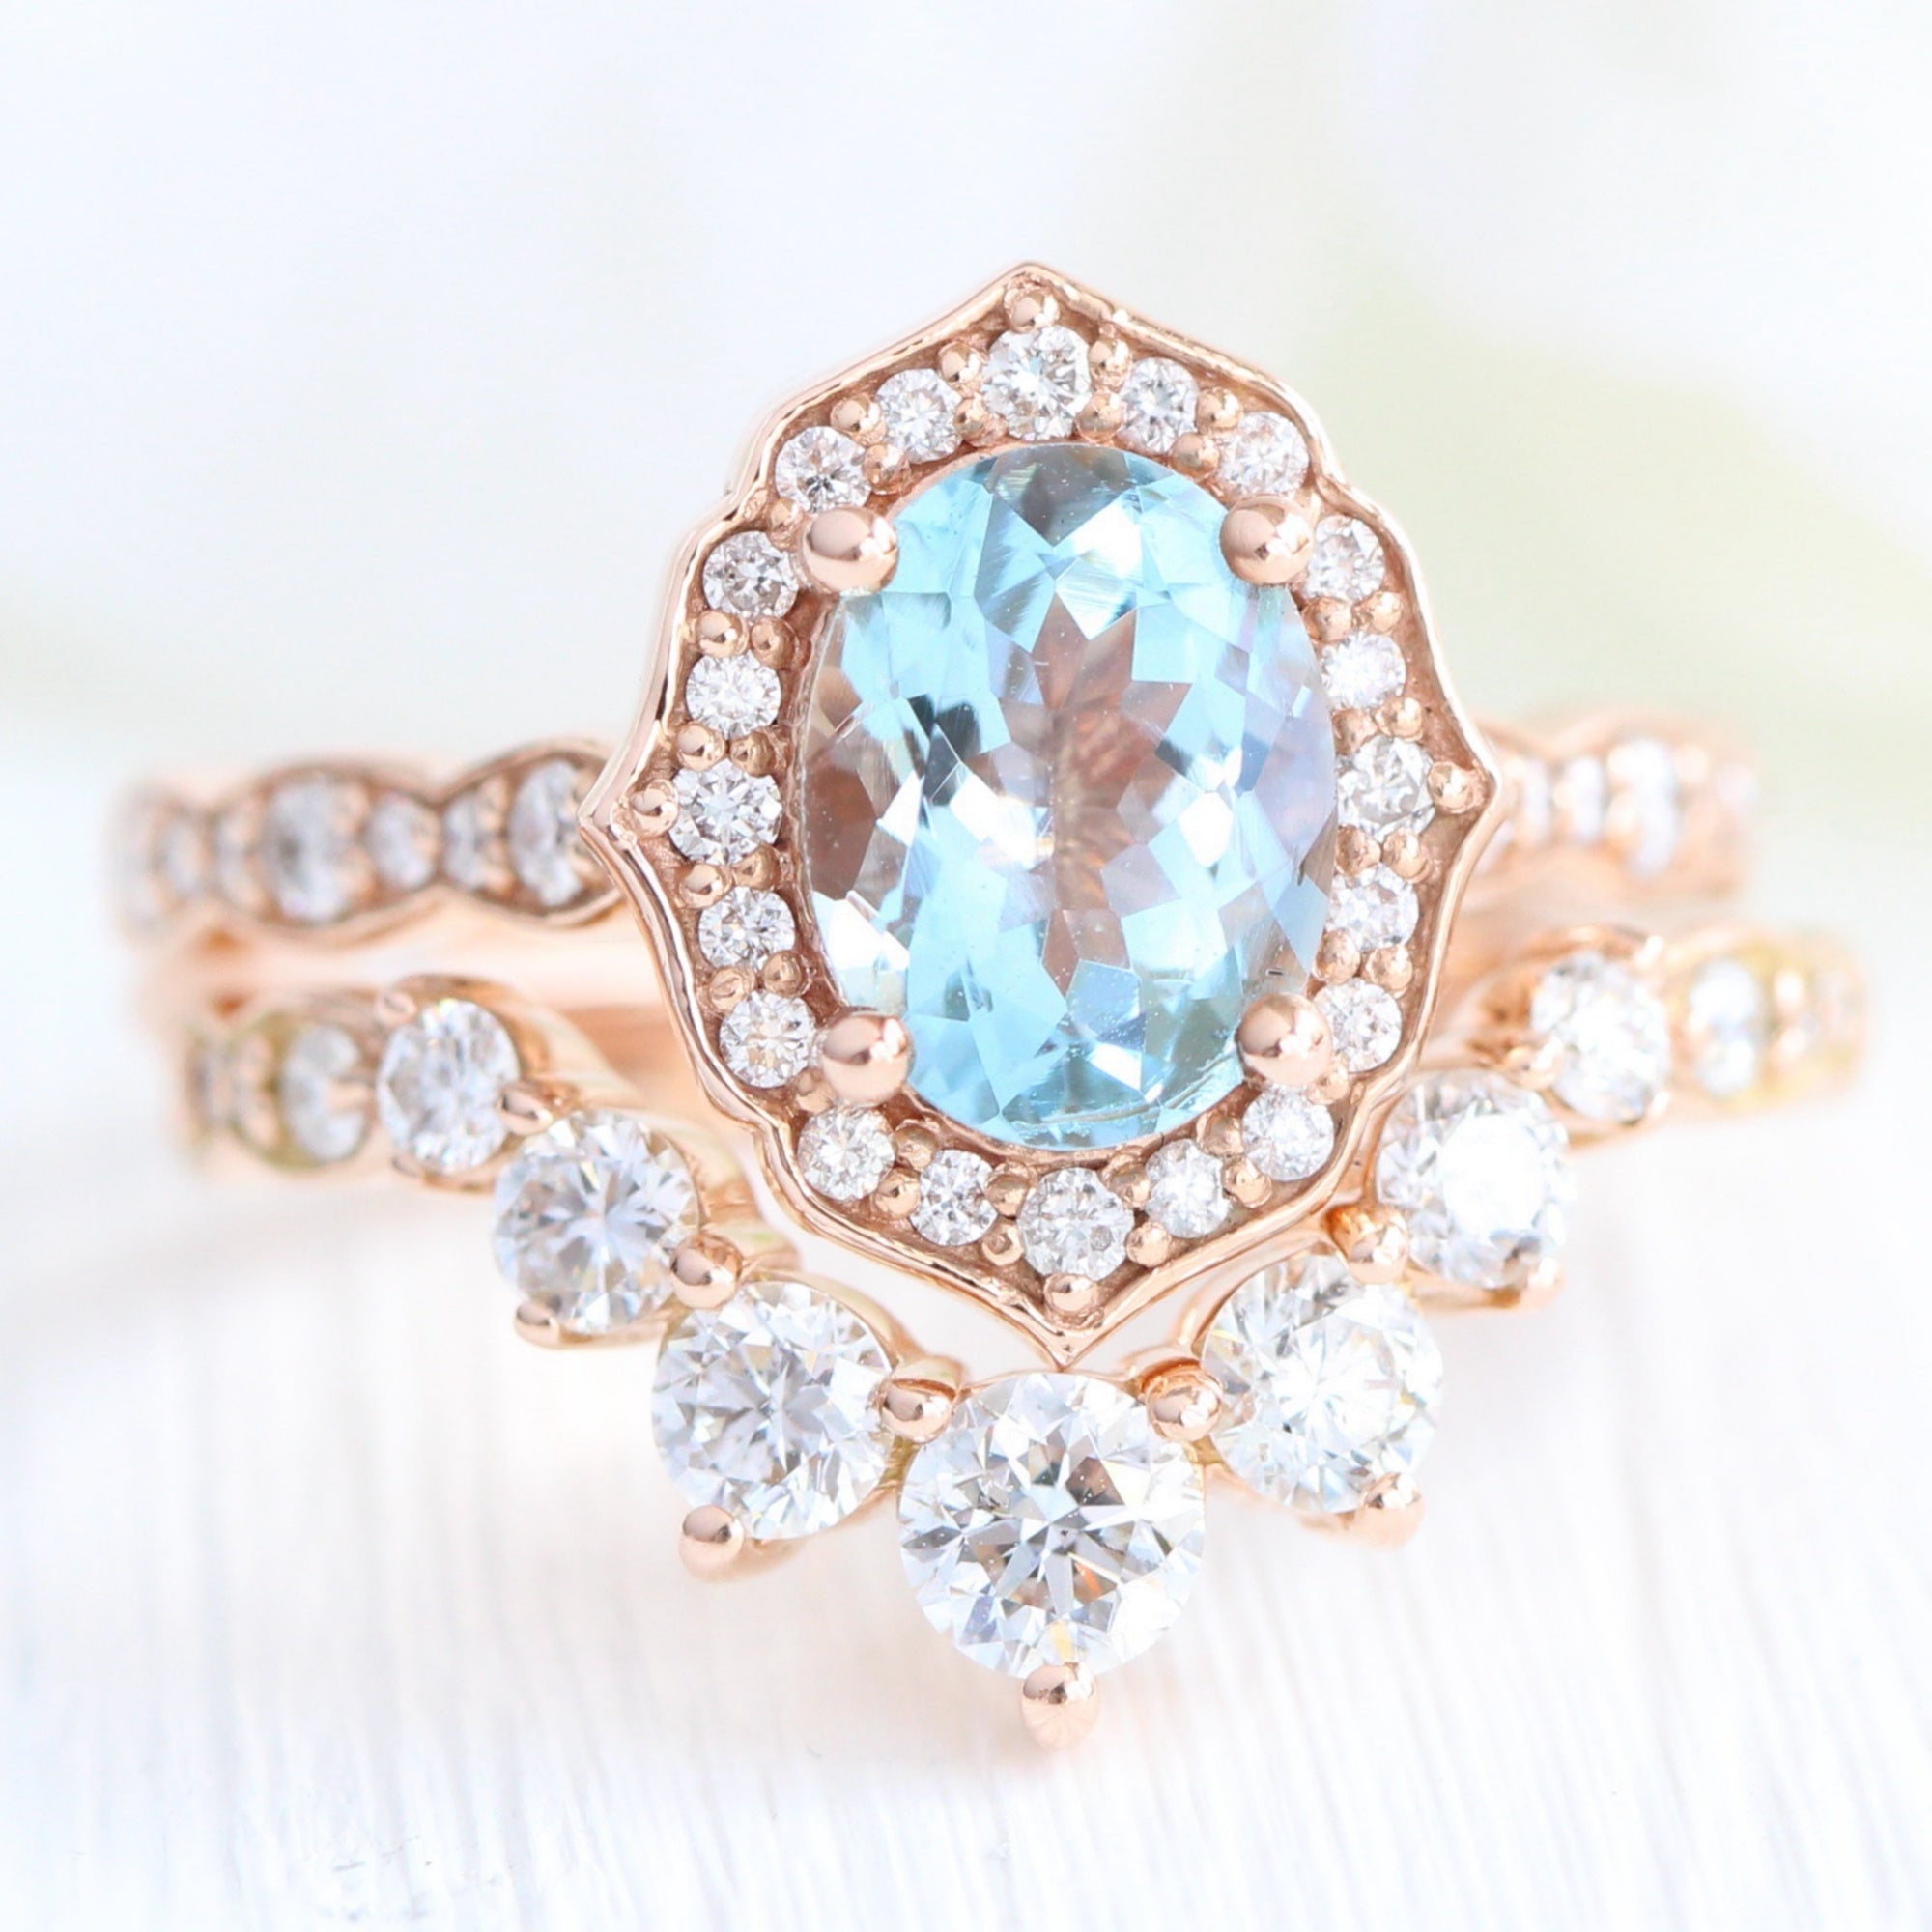 Vintage Floral Oval Aquamarine Ring w/ Diamonds in Scalloped Band